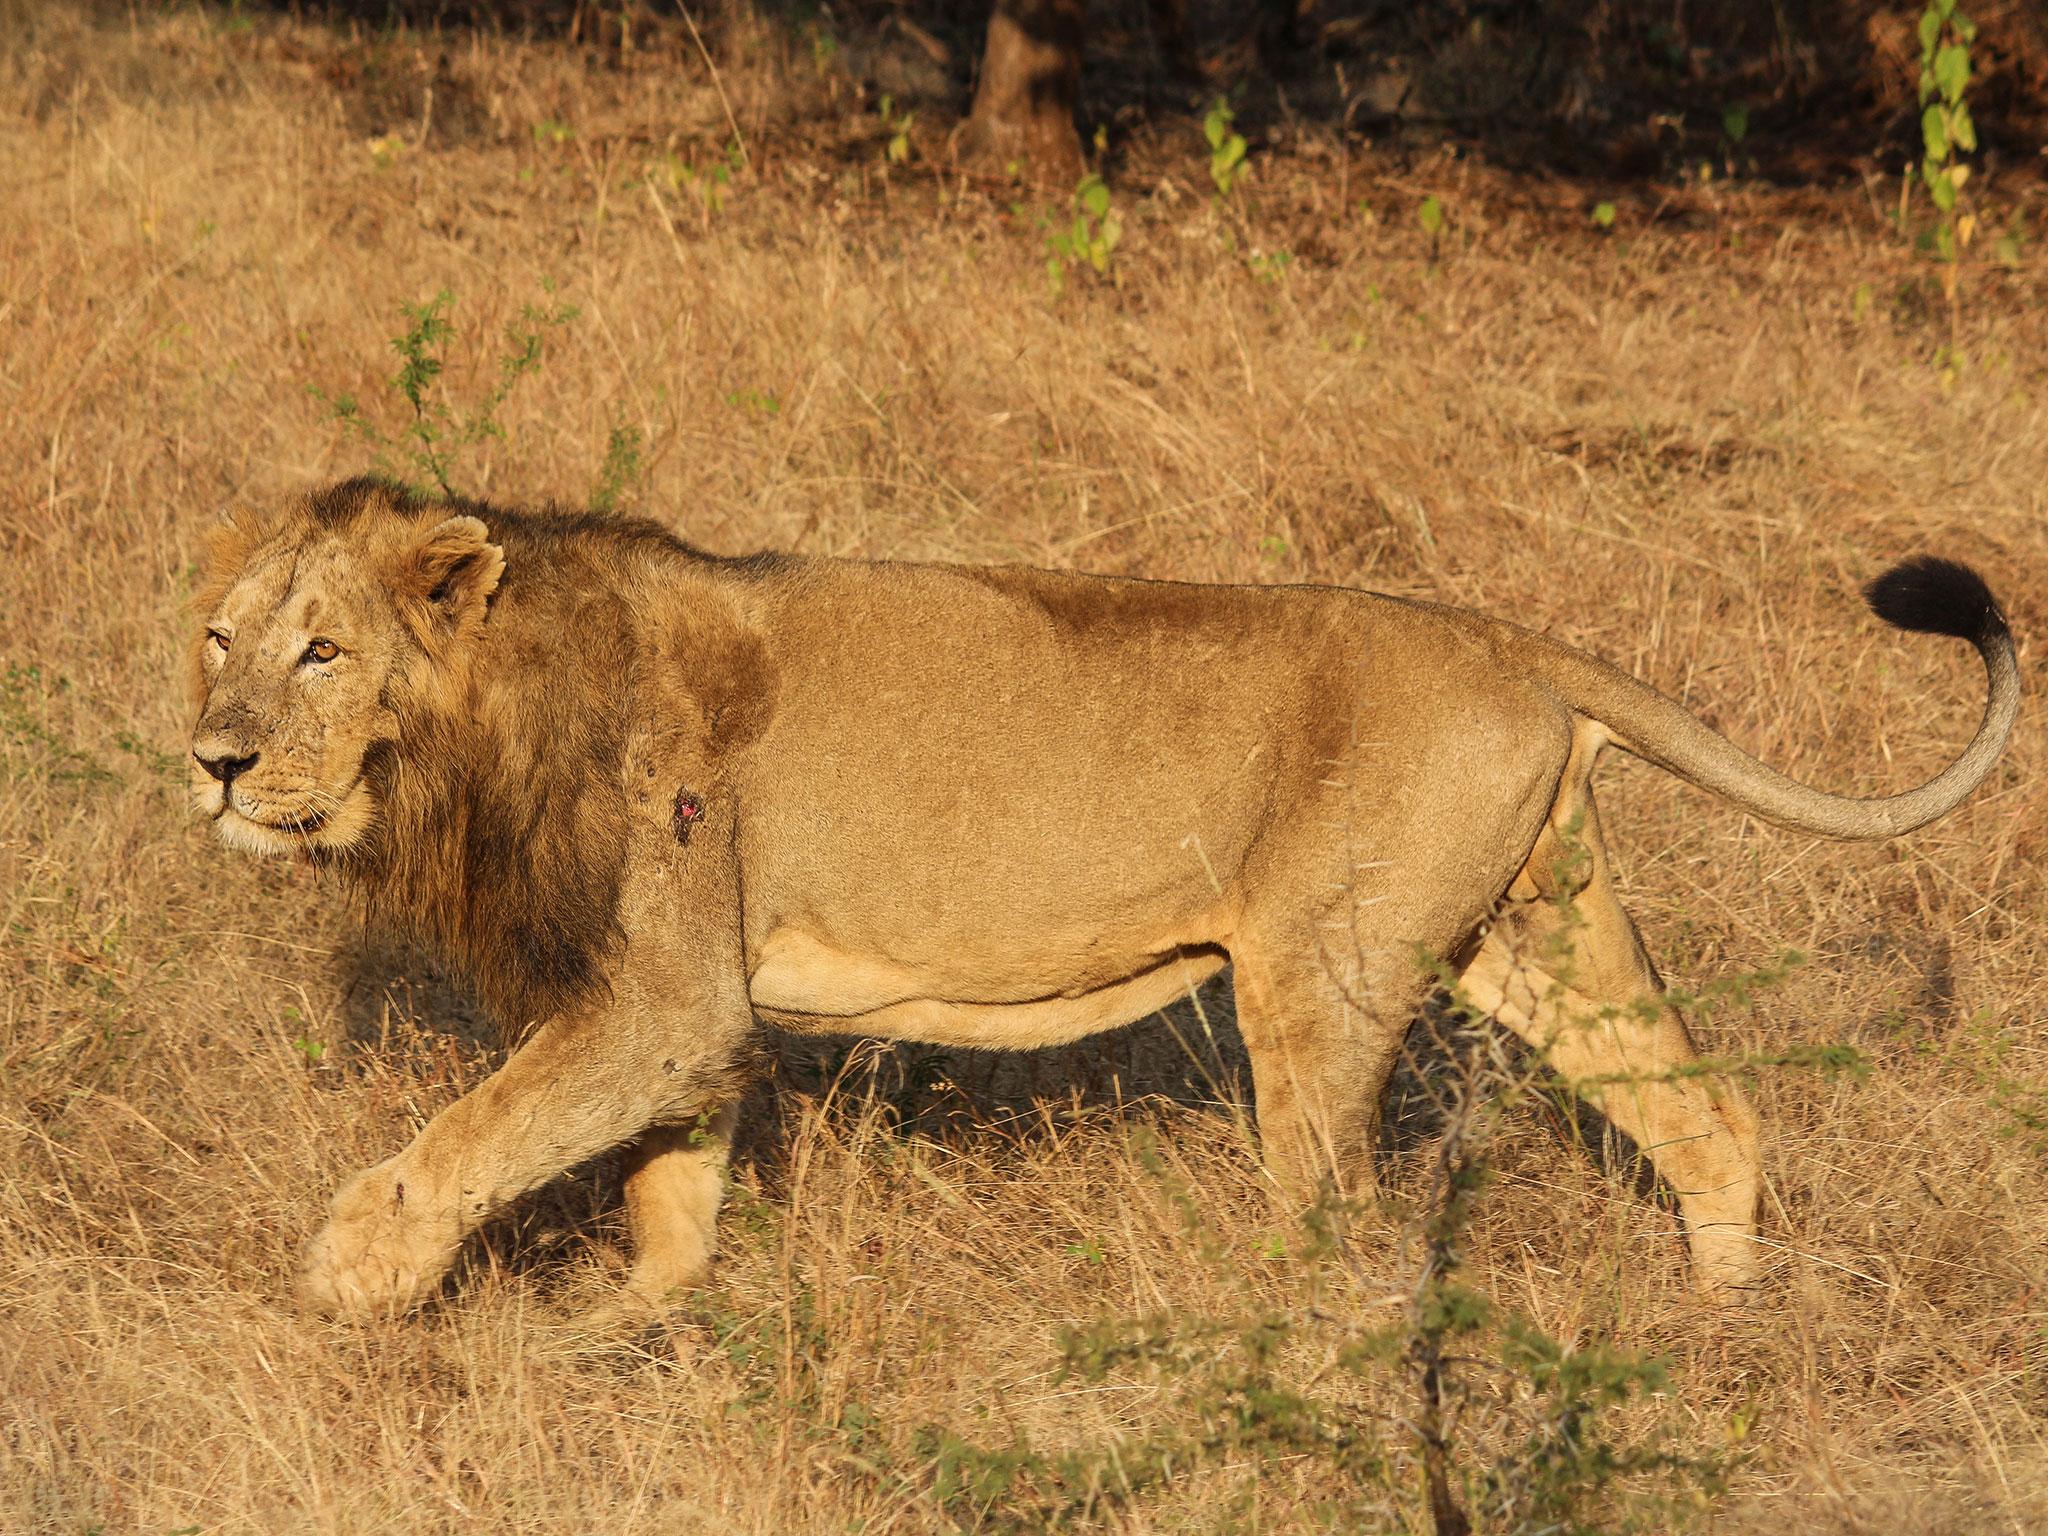 A male Asiatic lion in the Gir Forest, Gujarat state, India